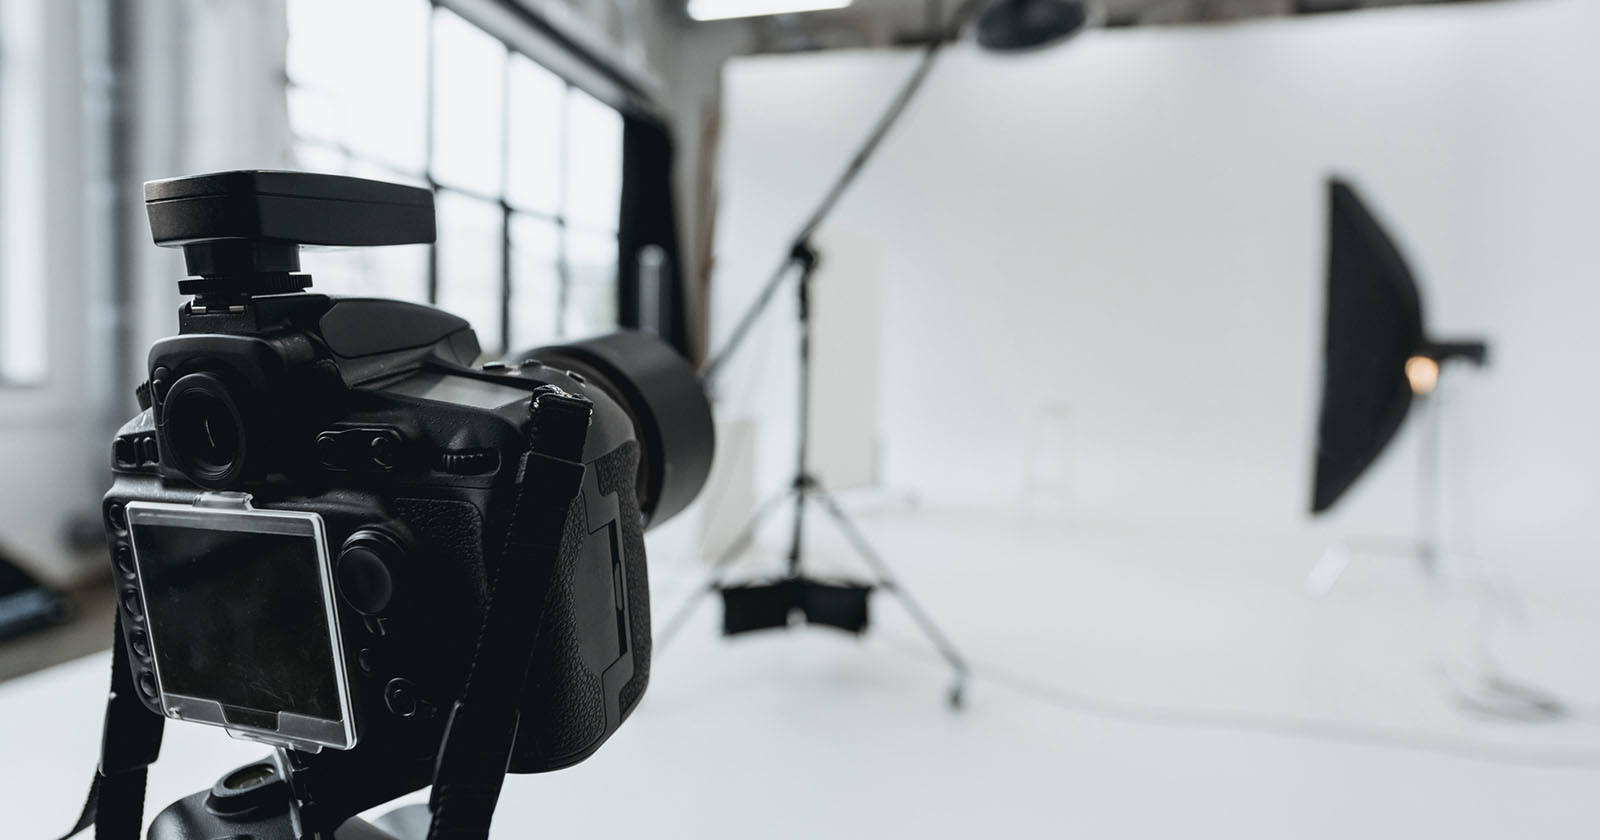  study finds commercial photography market growing 